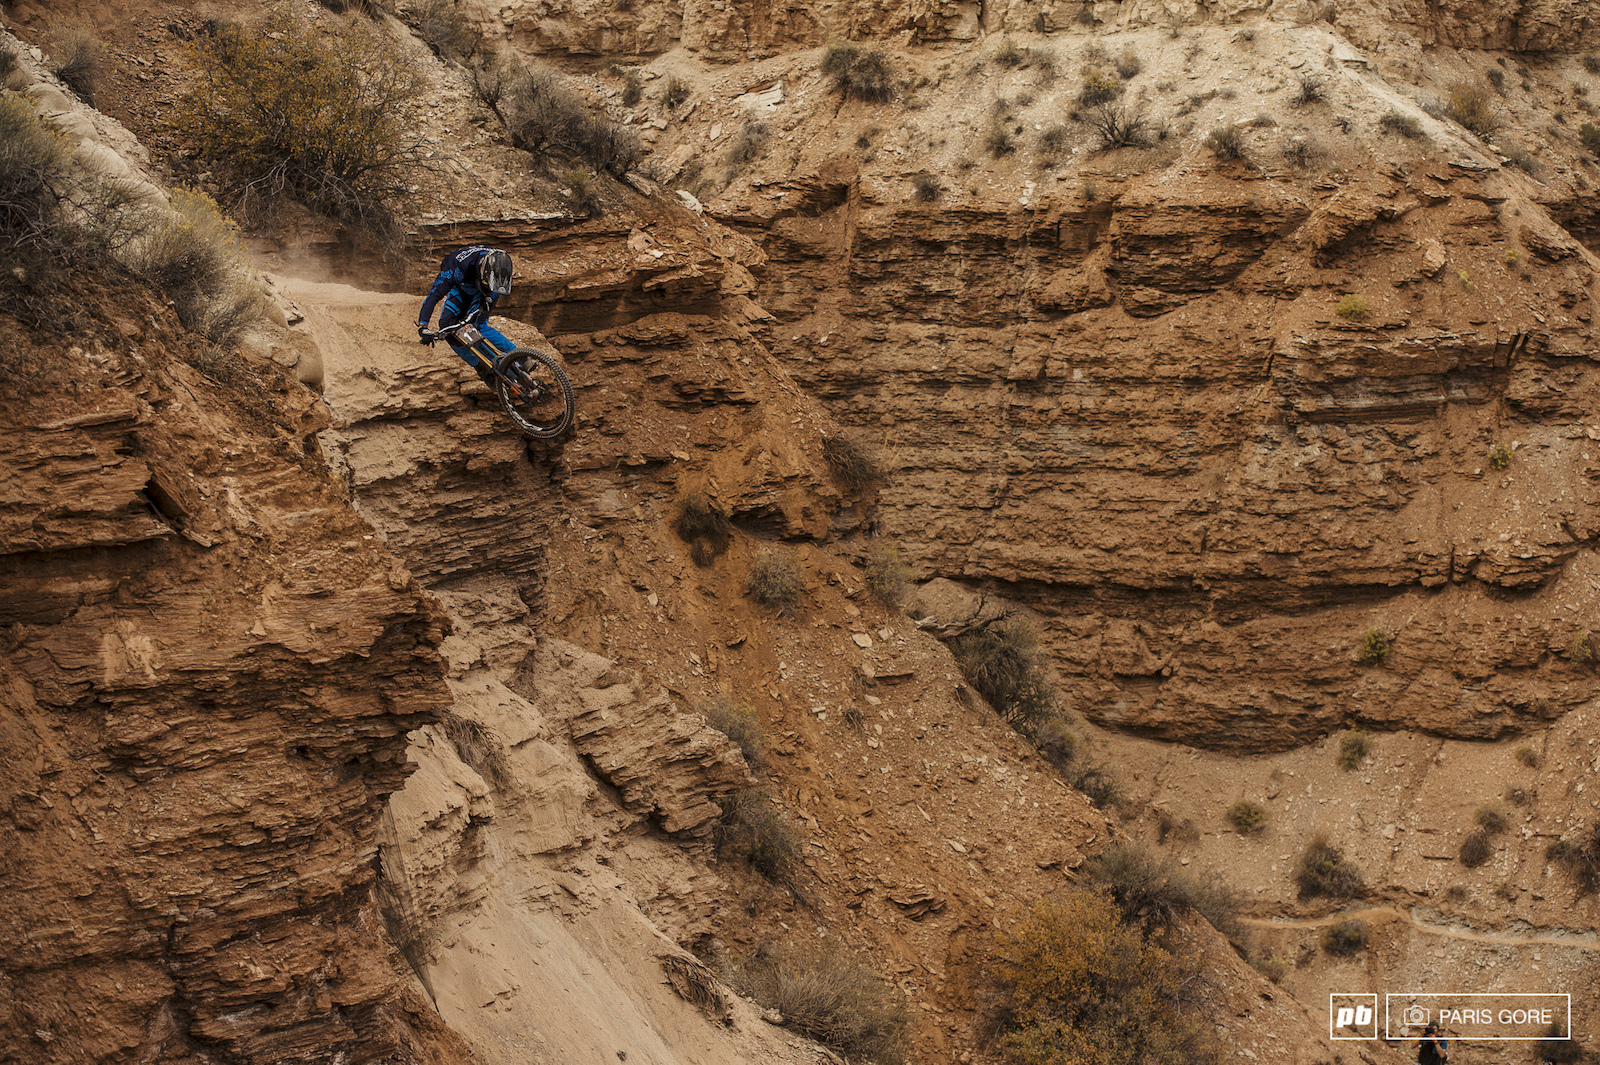 Bas Van Steenbergen s first time at Rampage and you could see just how much fun he was having top to bottom. Nasty big mountain moves to flowy dh tech all in one run.